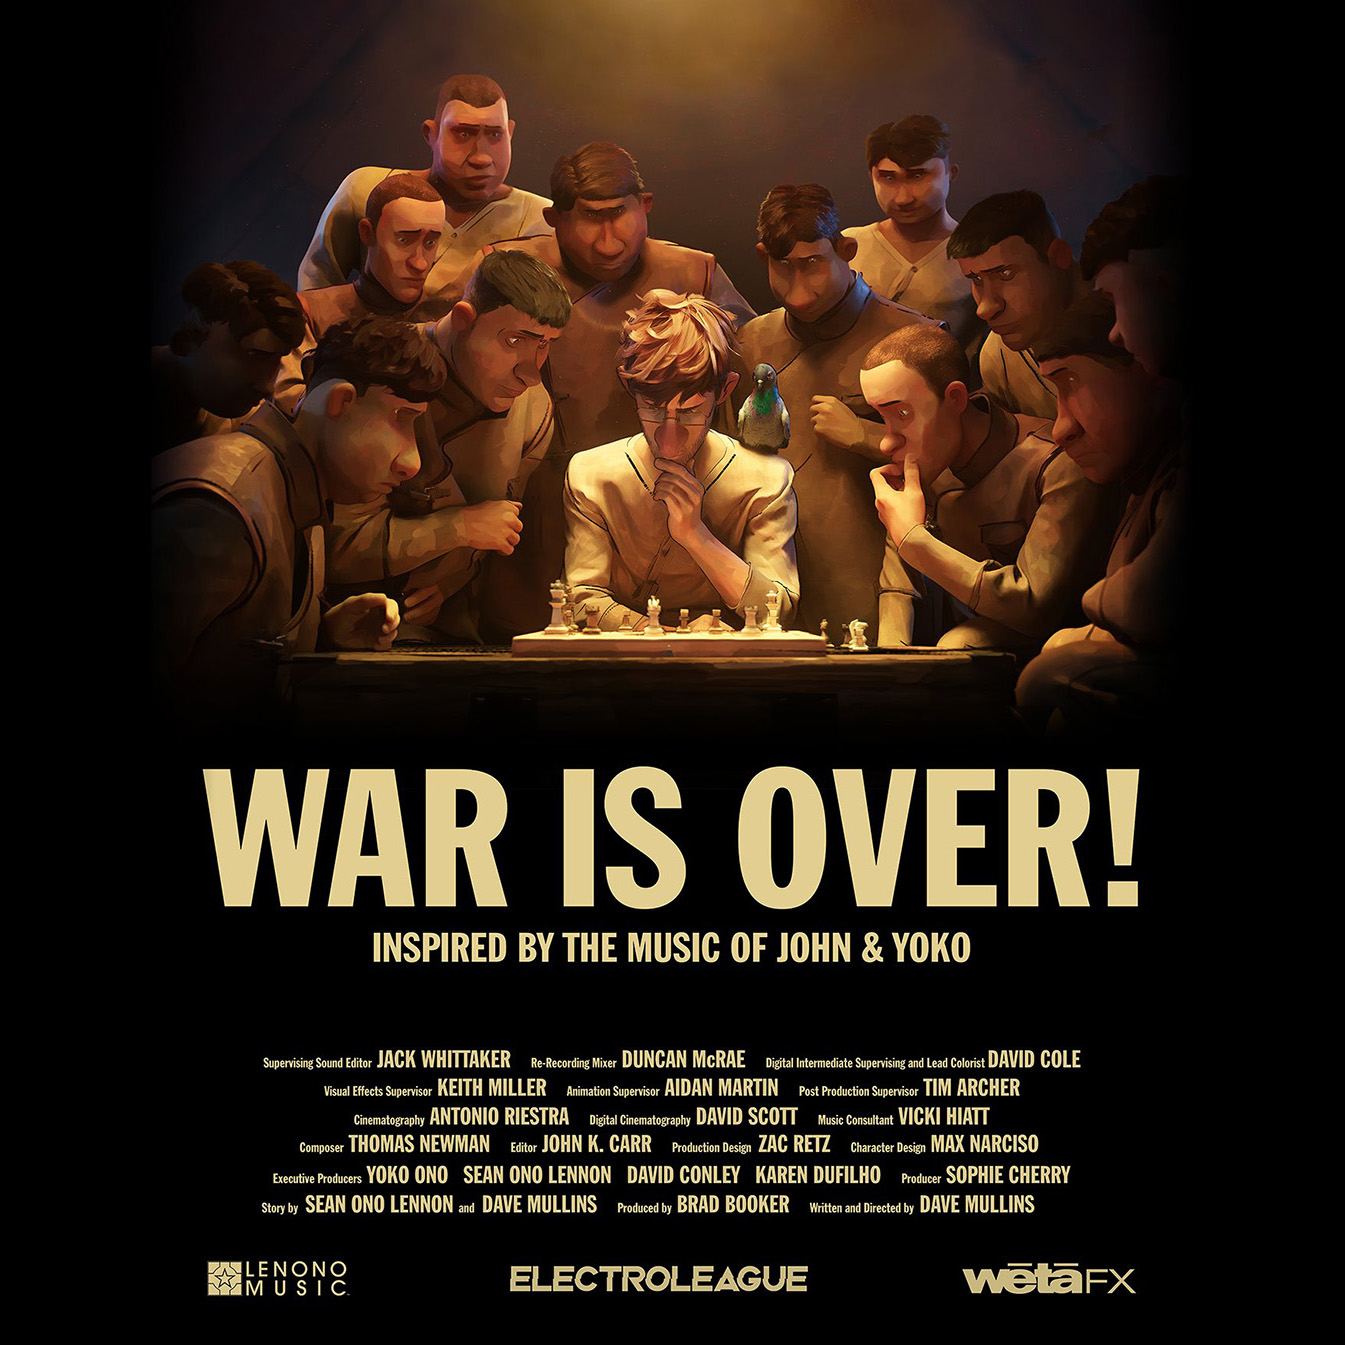 ‘WAR IS OVER!’ animated short film shortlisted for an Academy Award